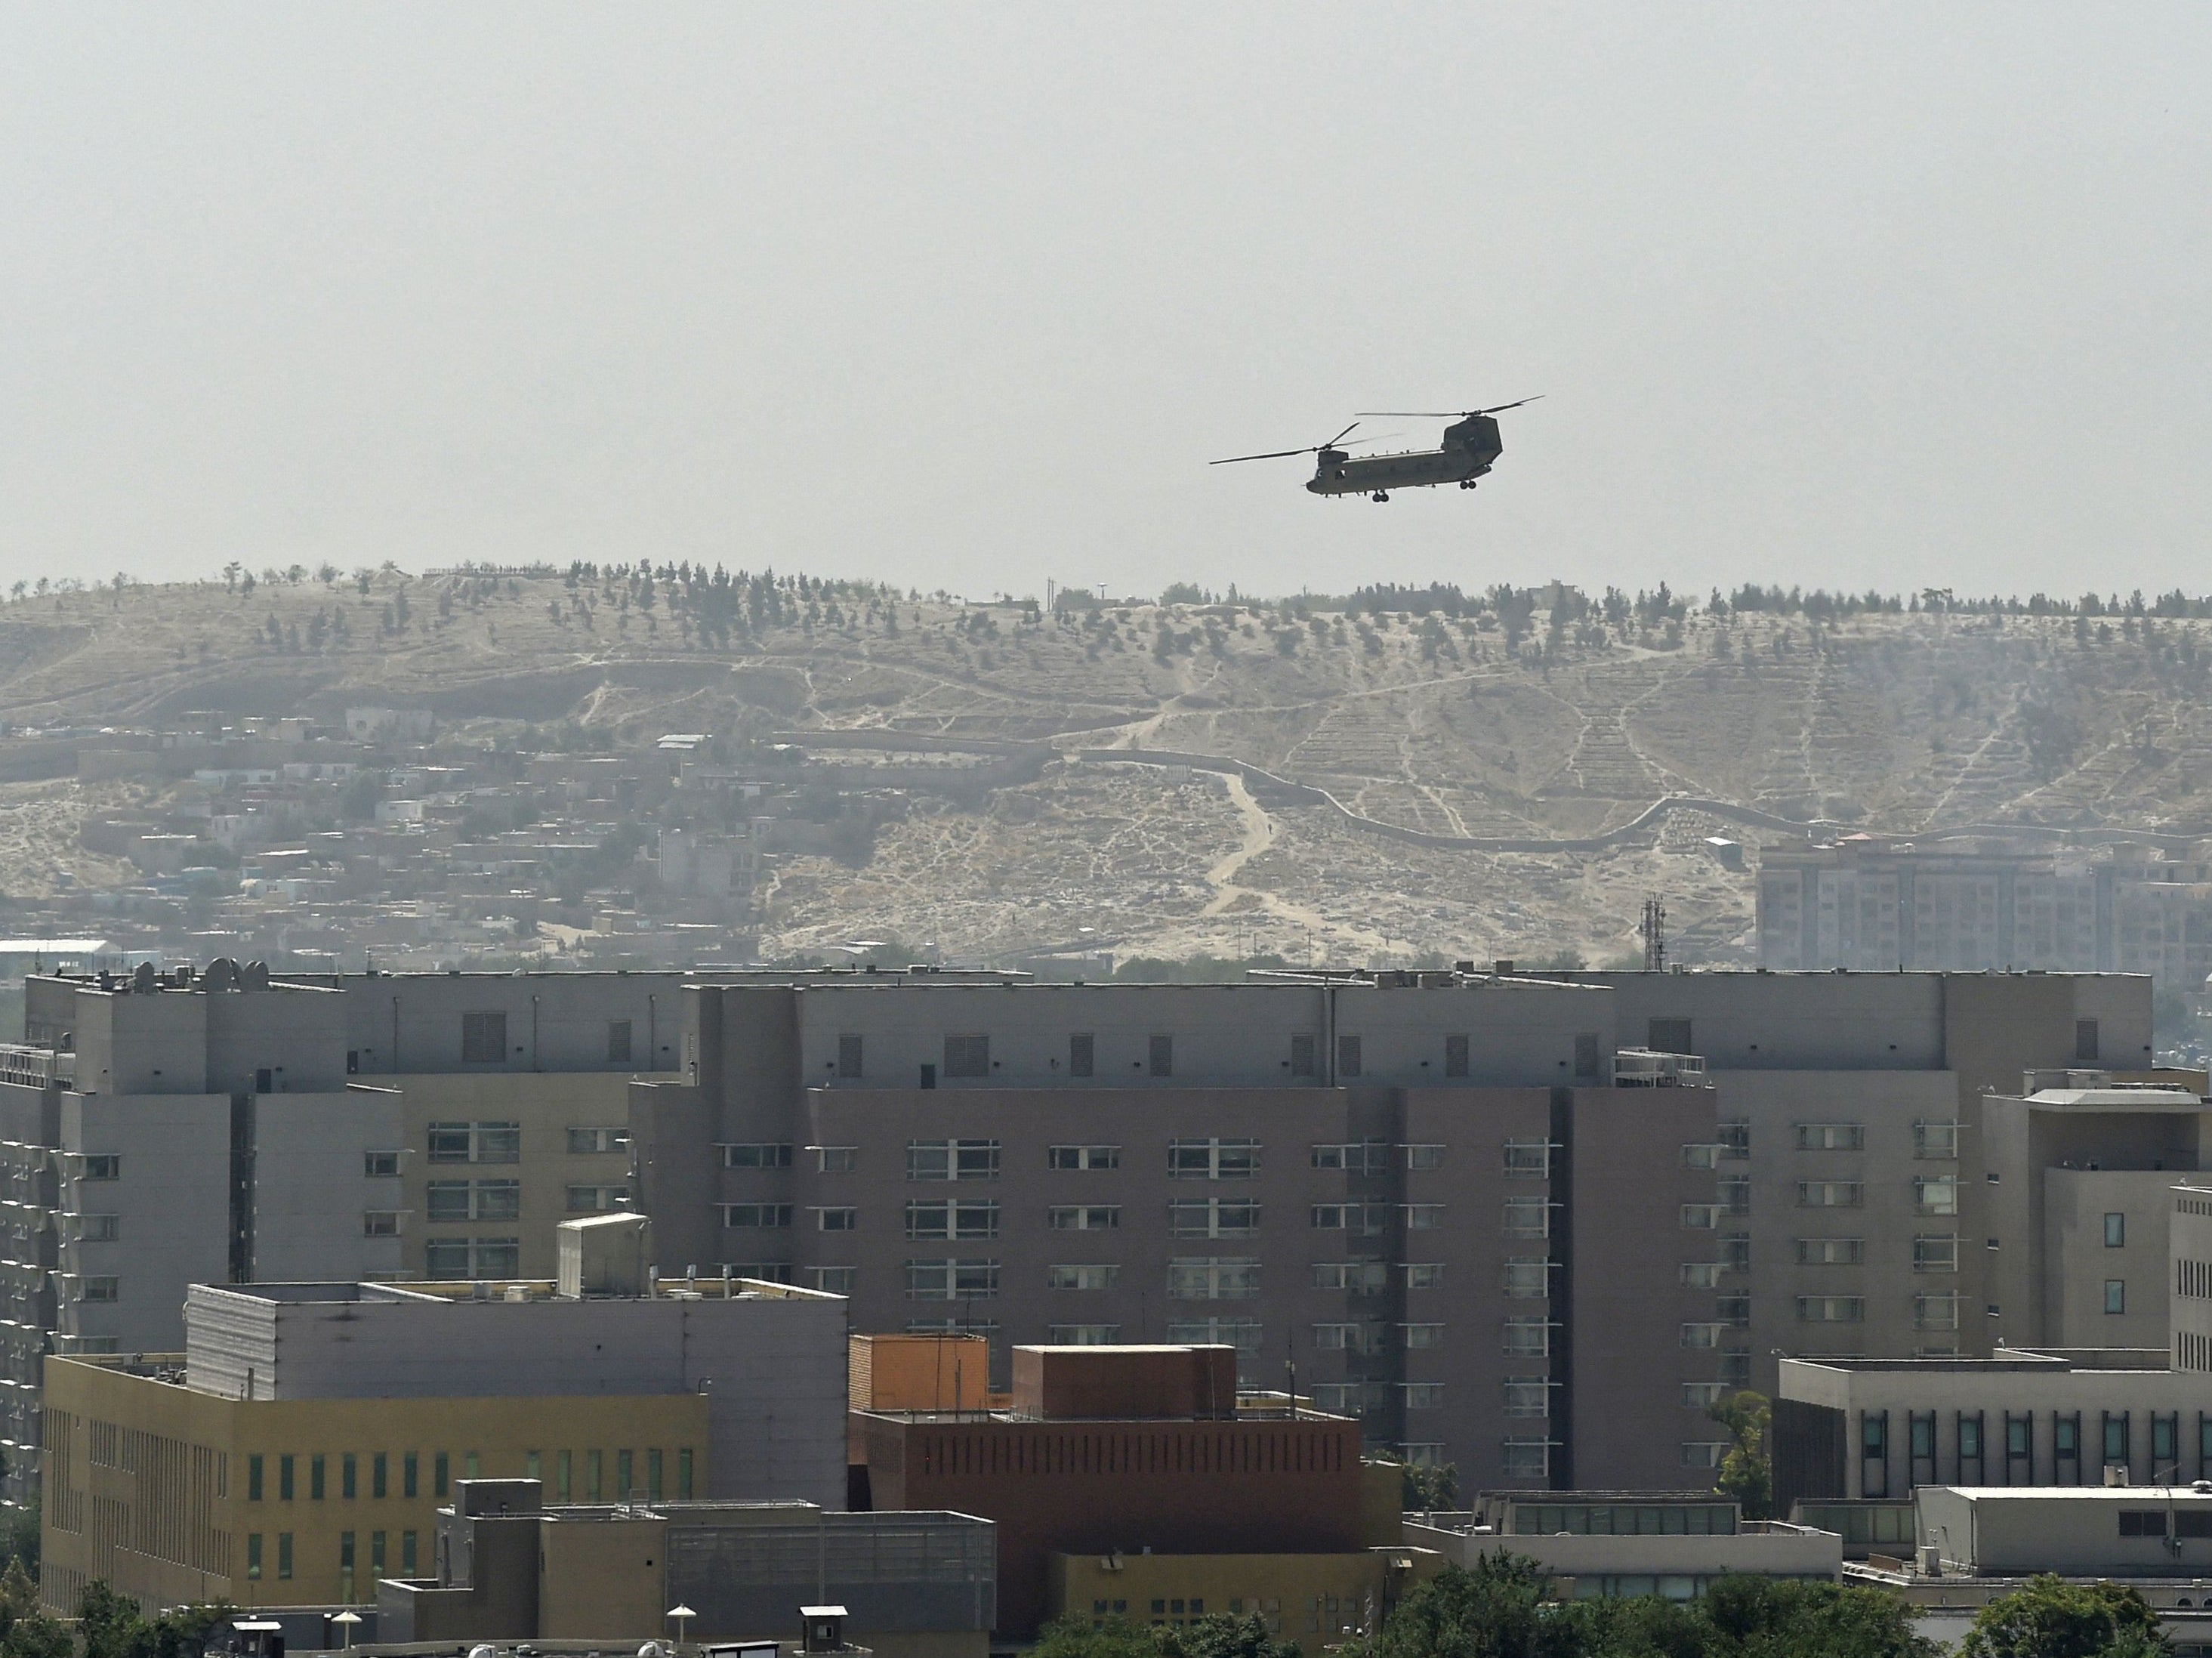 A US military helicopter is pictured flying above the US embassy in Kabul